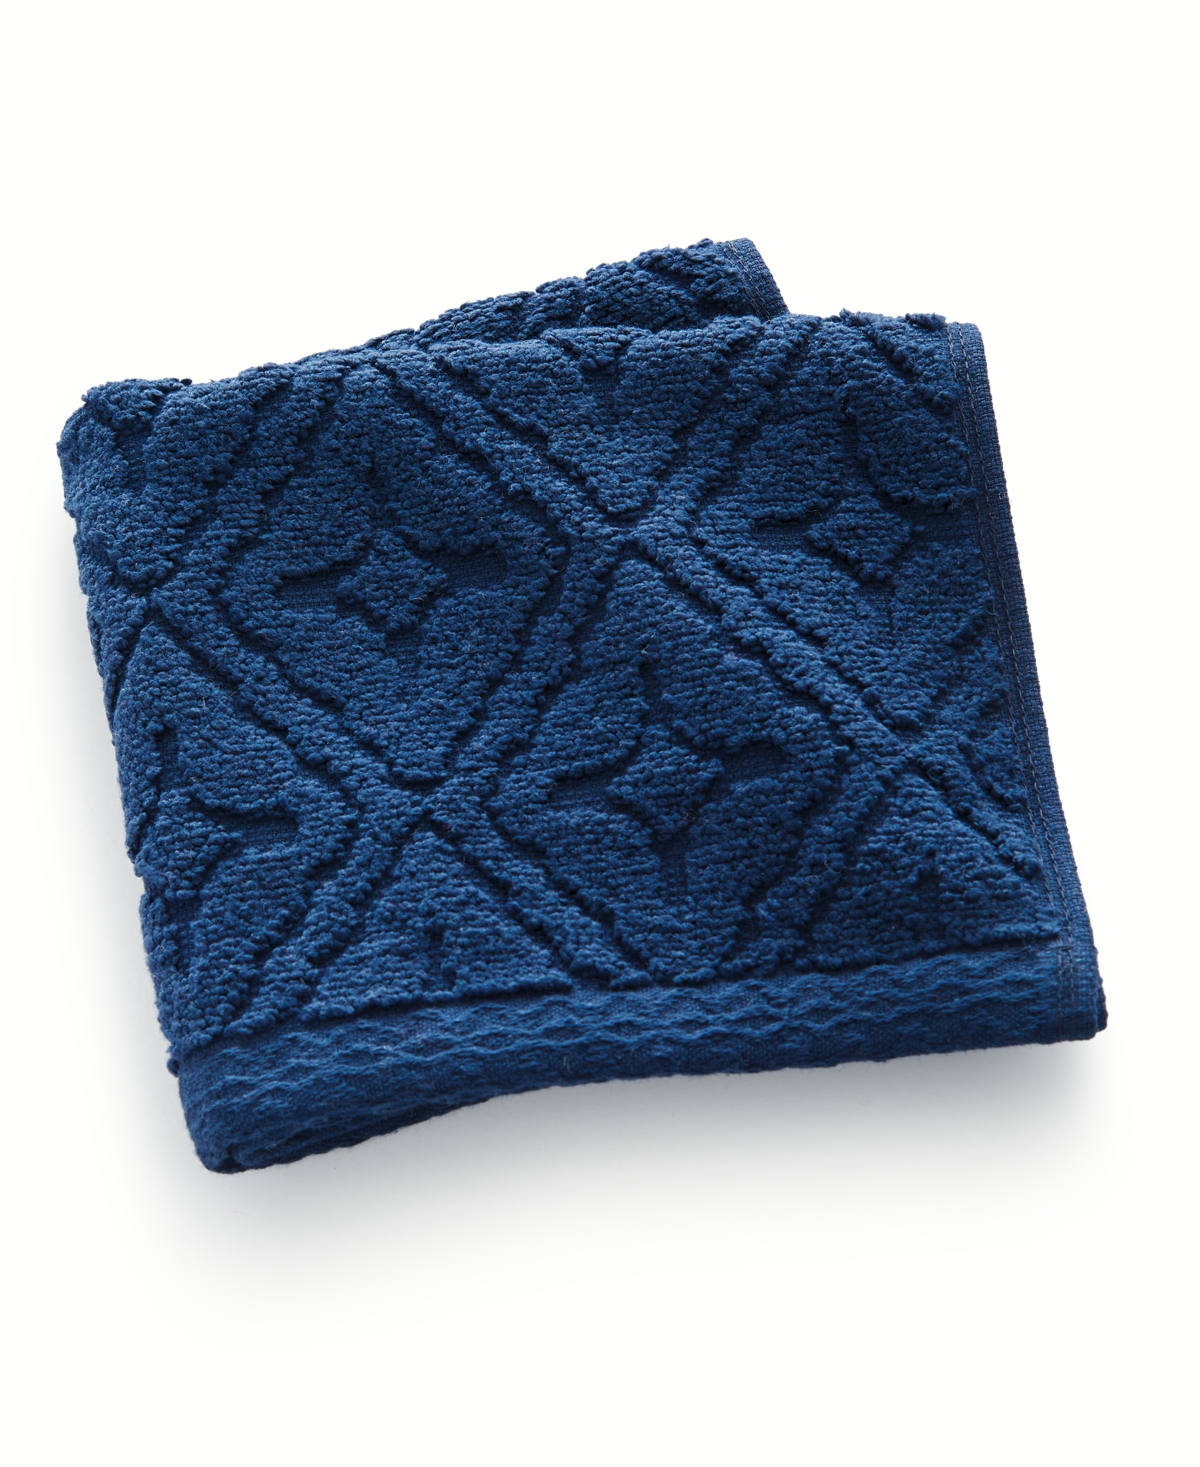 HOTEL COLLECTION MICRO COTTON SCULPTED TONAL TILE WASHCLOTH, 13" X 13", CREATED FOR MACY'S